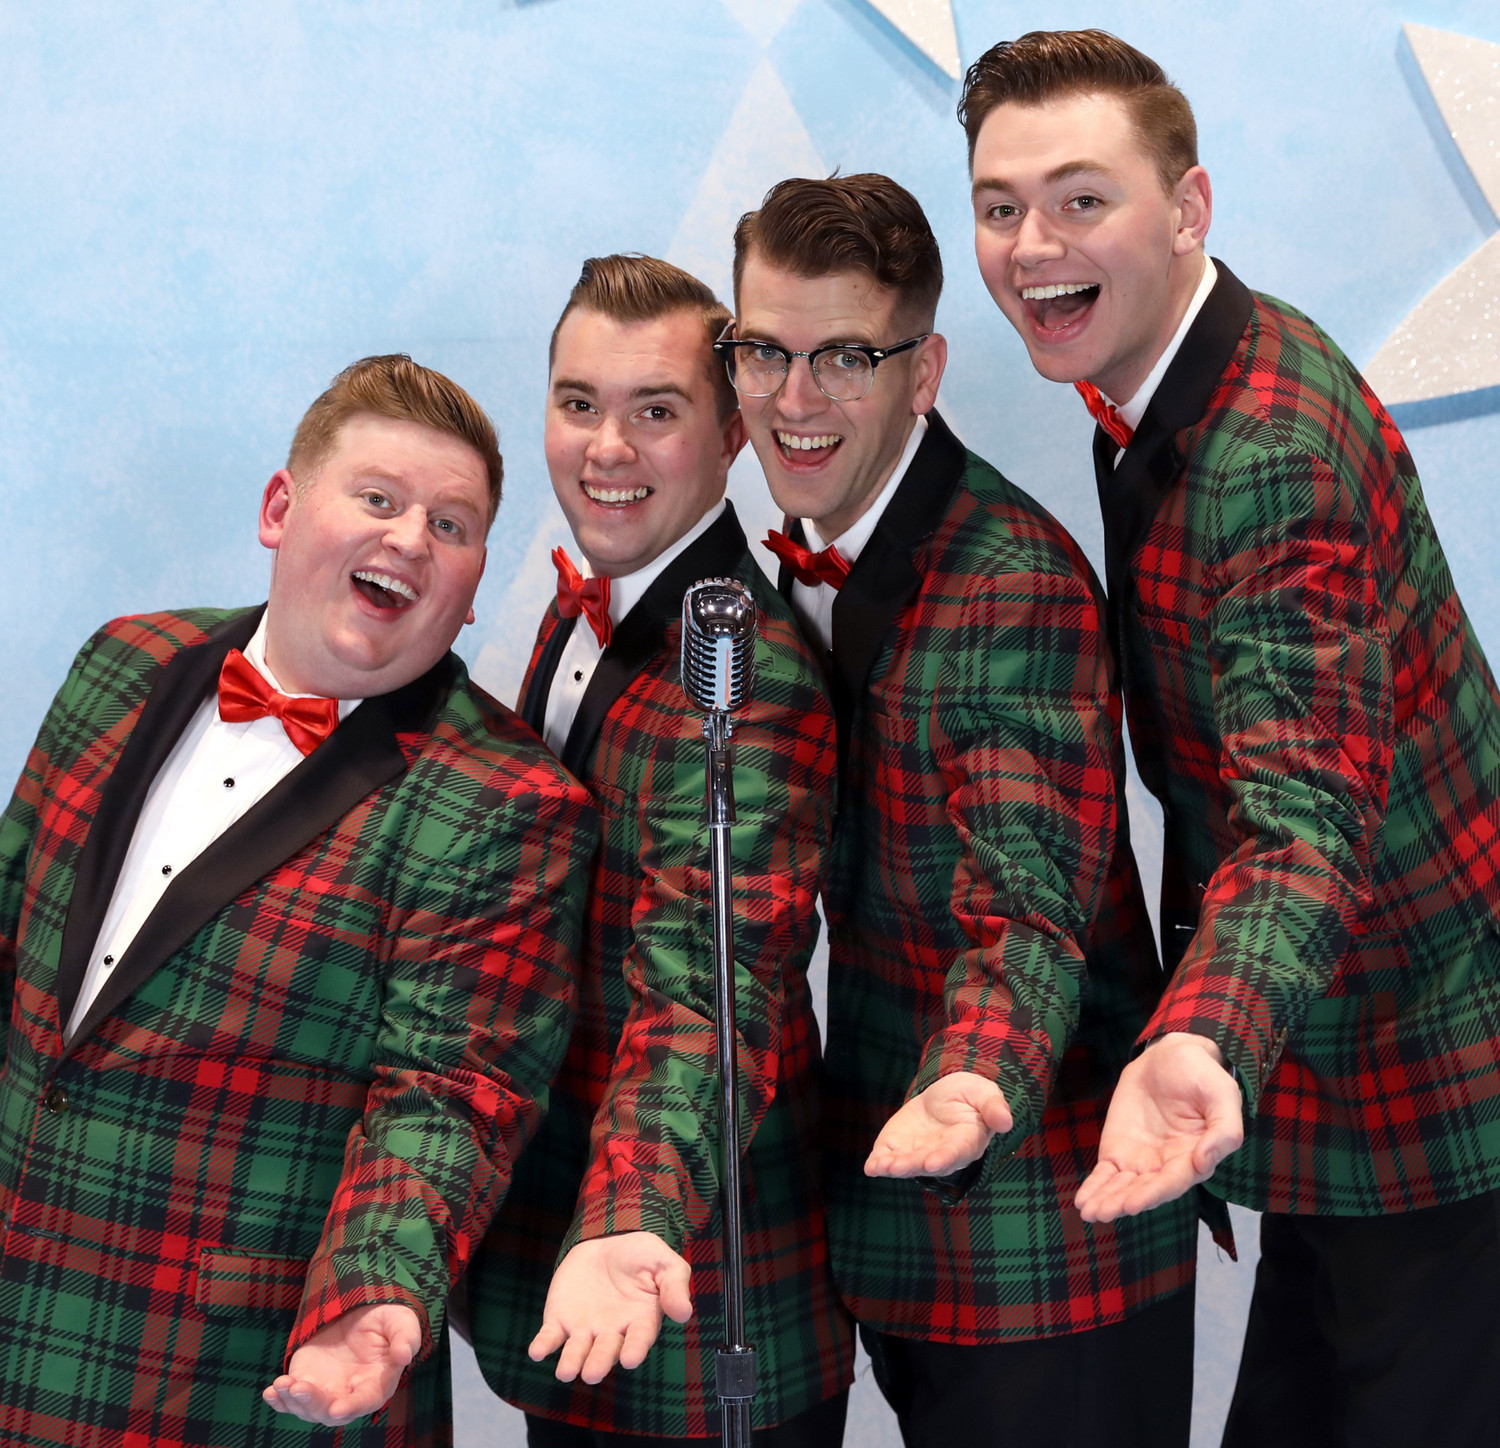 BWW Preview: PLAID TIDINGS Brings Christmas Joy and Harmonious Dysfunction to Mill Town Players 